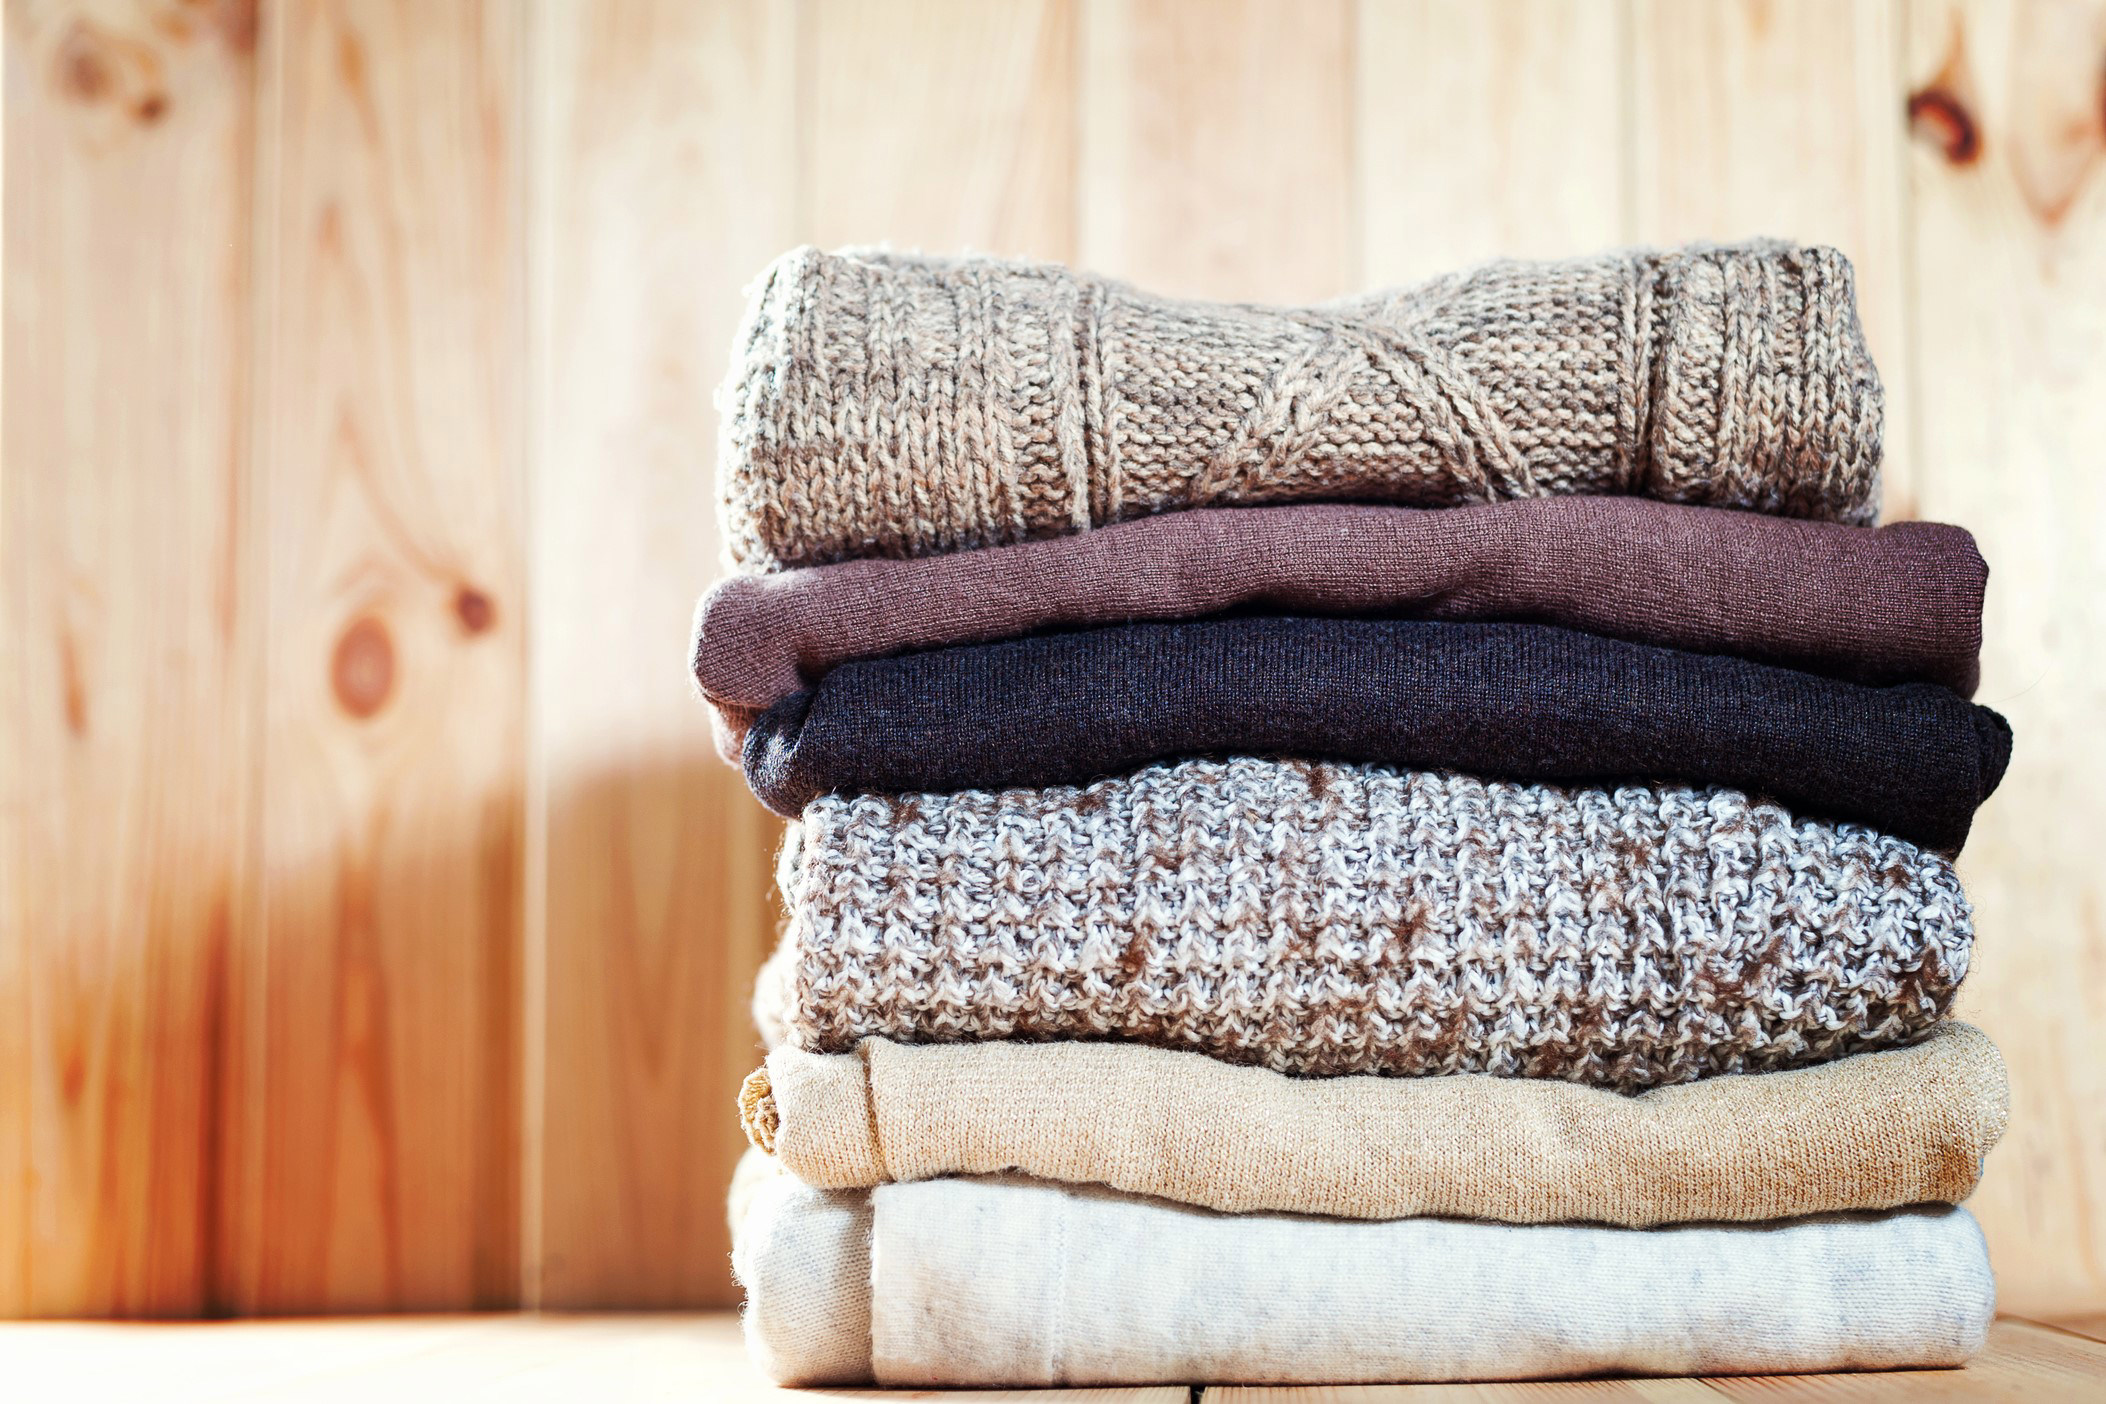 How to wash a cashmere sweater without ruining it